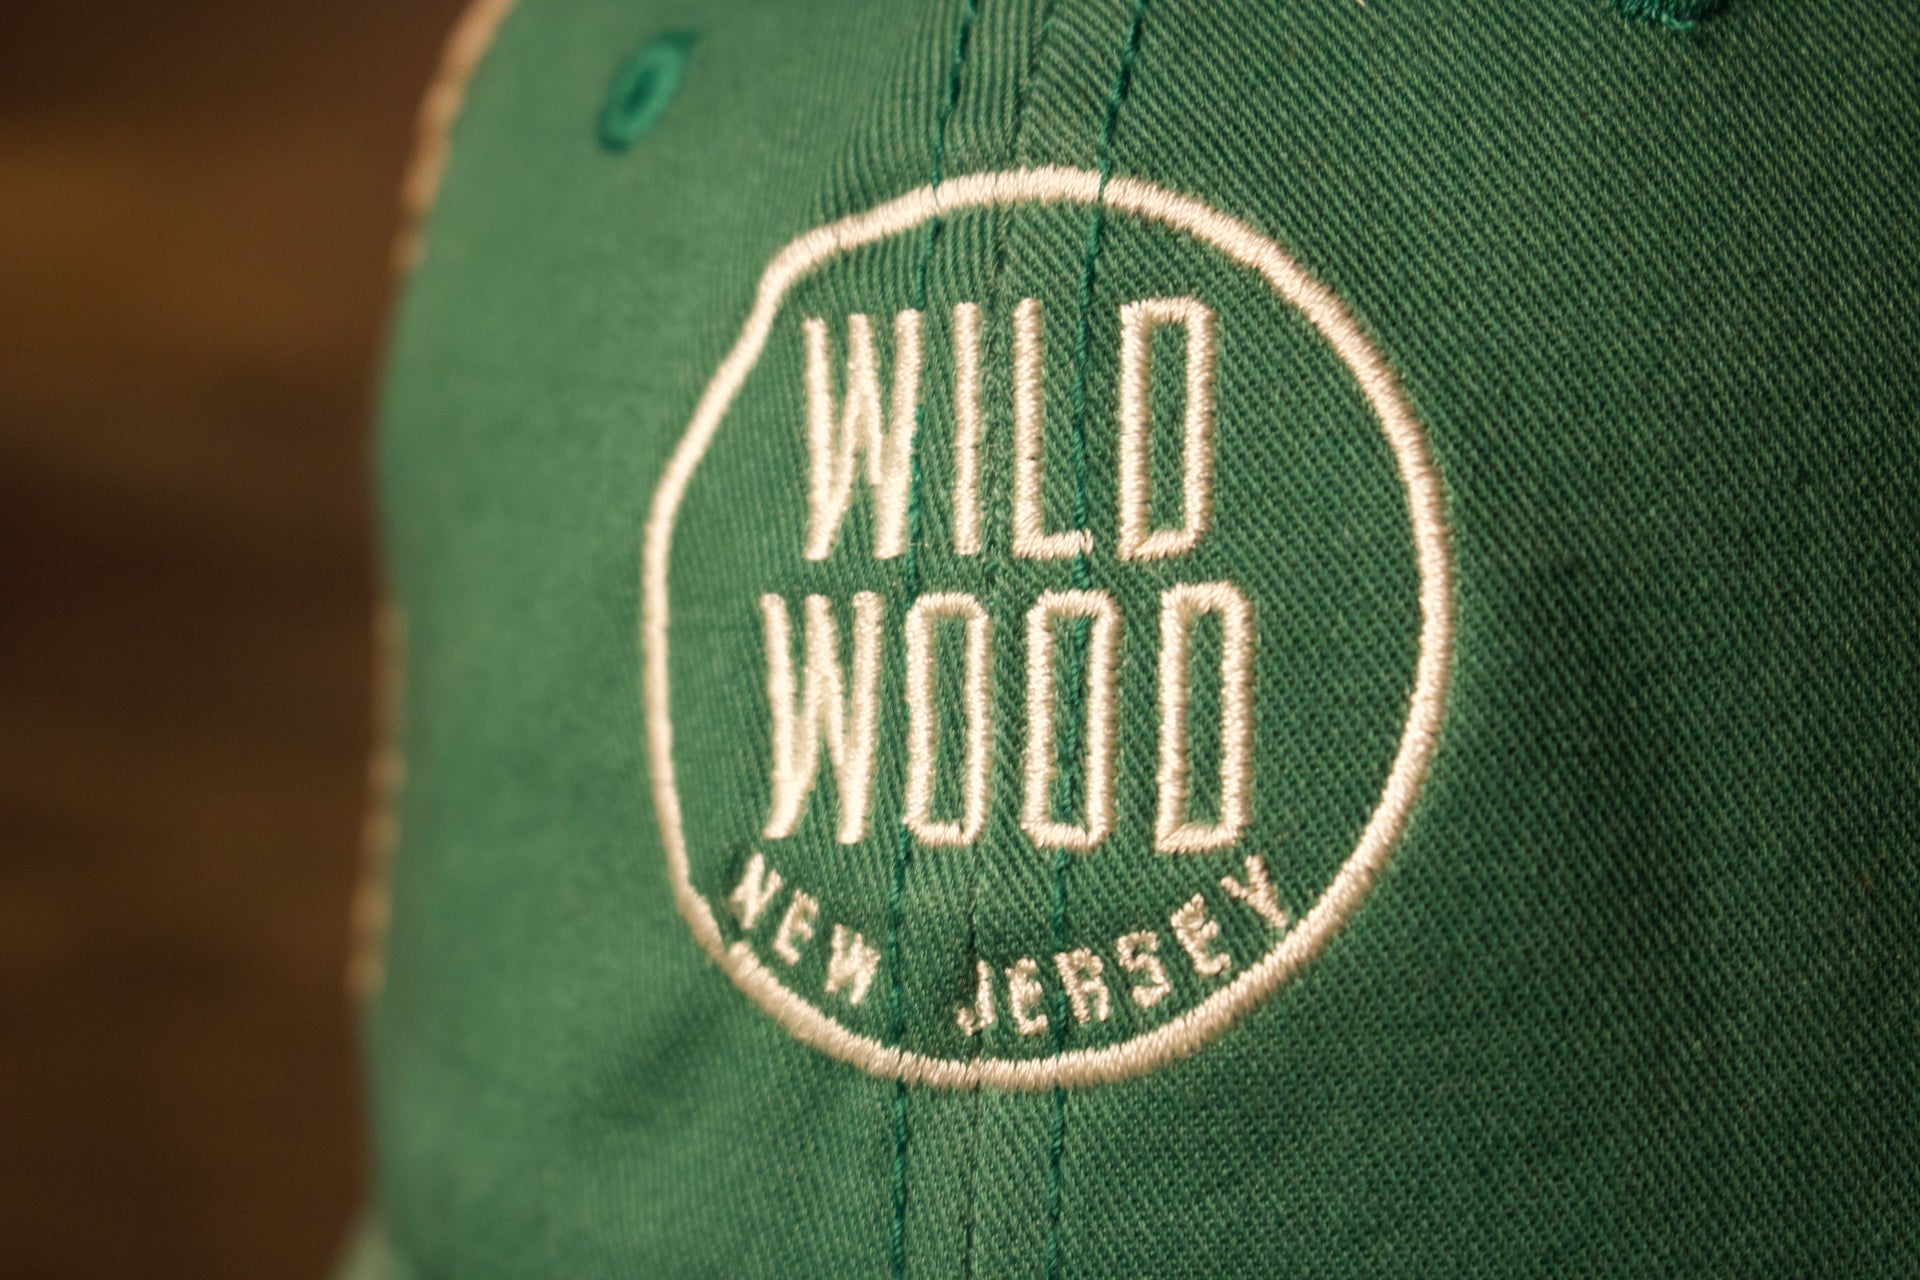 the text is white and its inside a white circle Wildwood New Jersey Kelly Green / Khaki Mesh-Back Trucker Hat